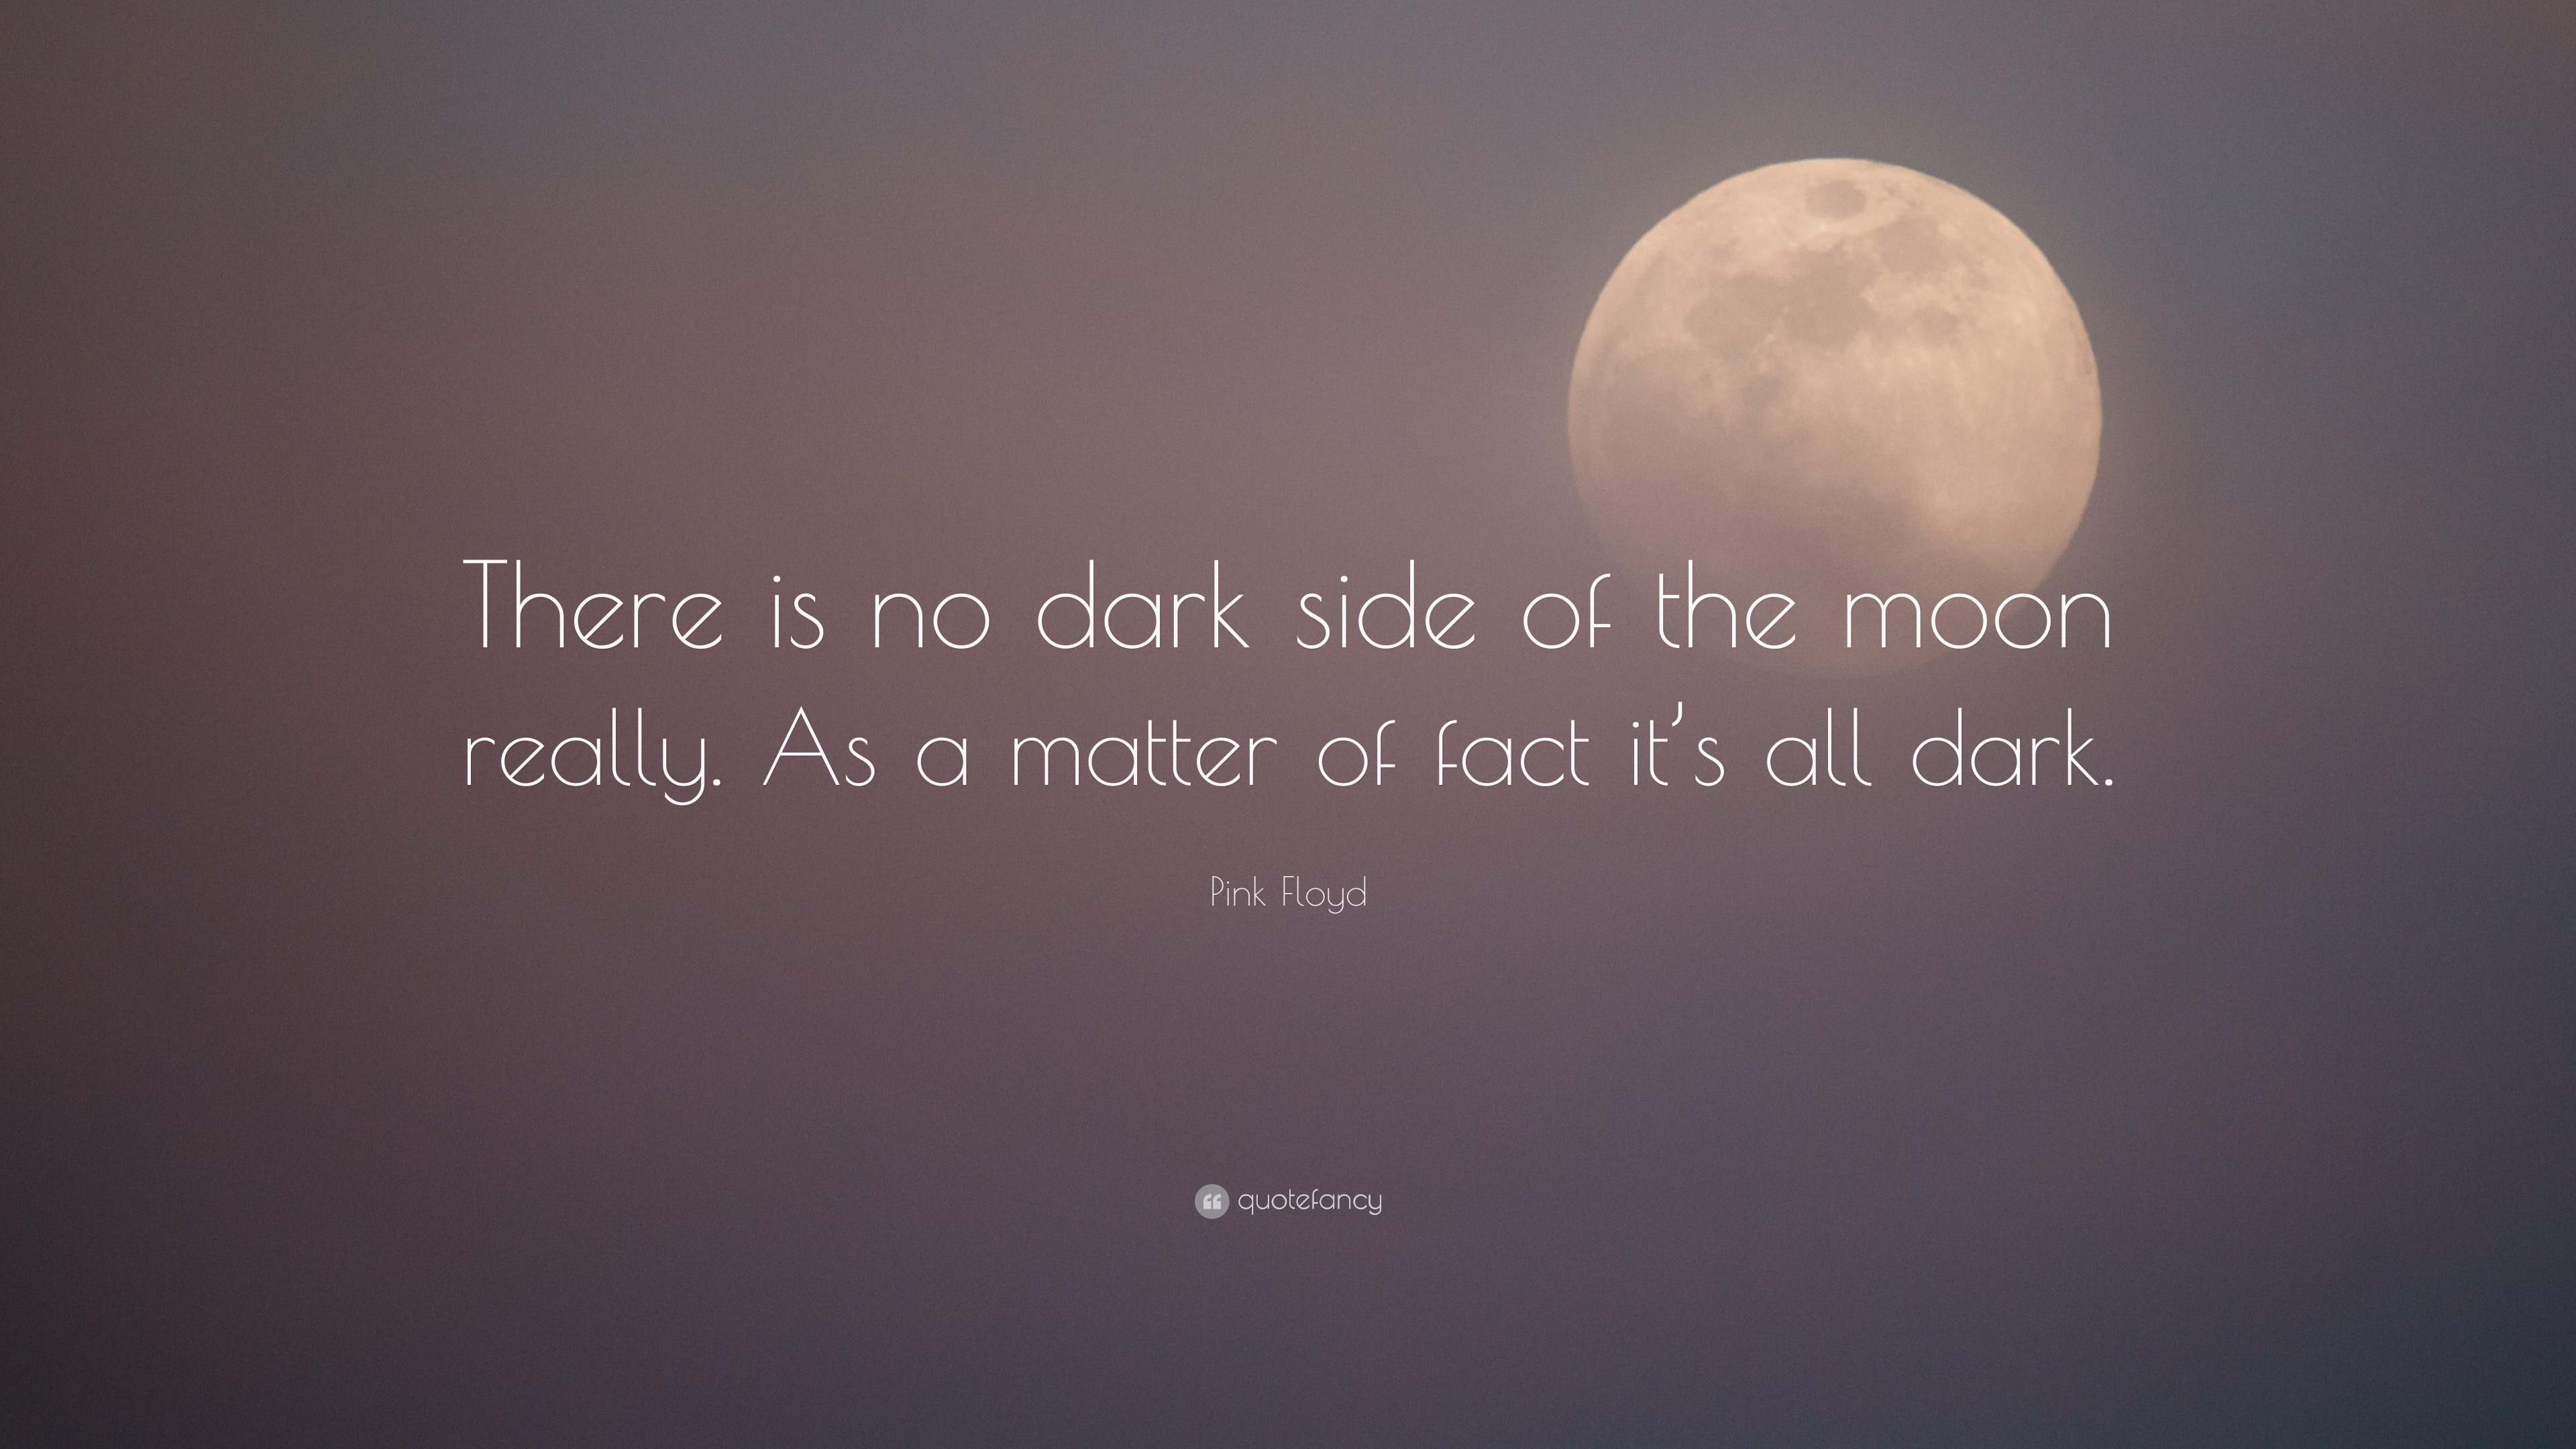 Pink Floyd Quote: “There is no dark side of the moon really. As a matter of